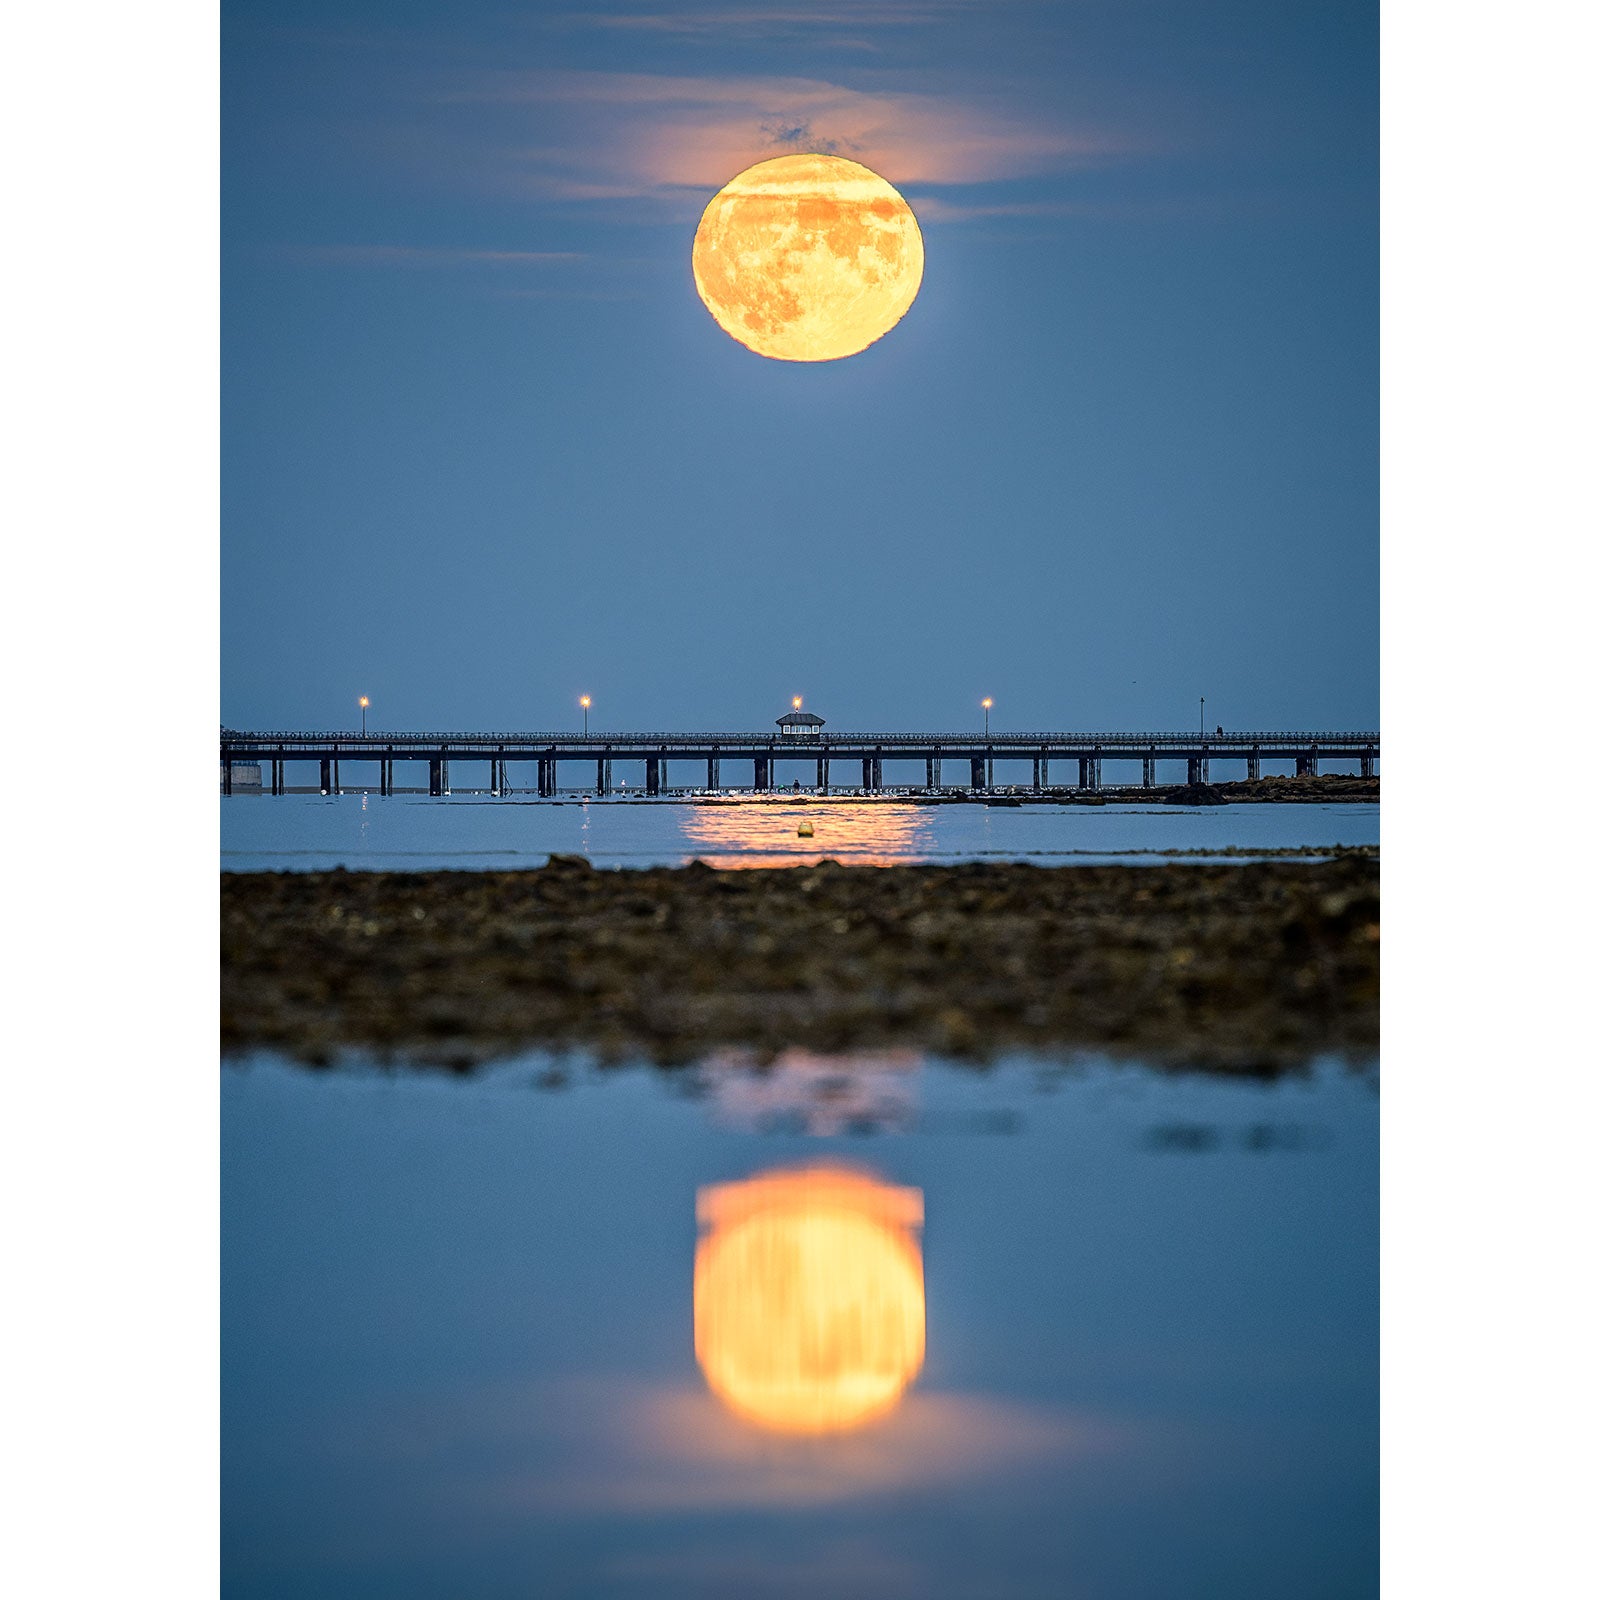 A Moonrise, Ryde Pier aligns perfectly above a pier, with its reflection highlighted in the water below, as Steve Wight captures the moment with Available Light Photography.